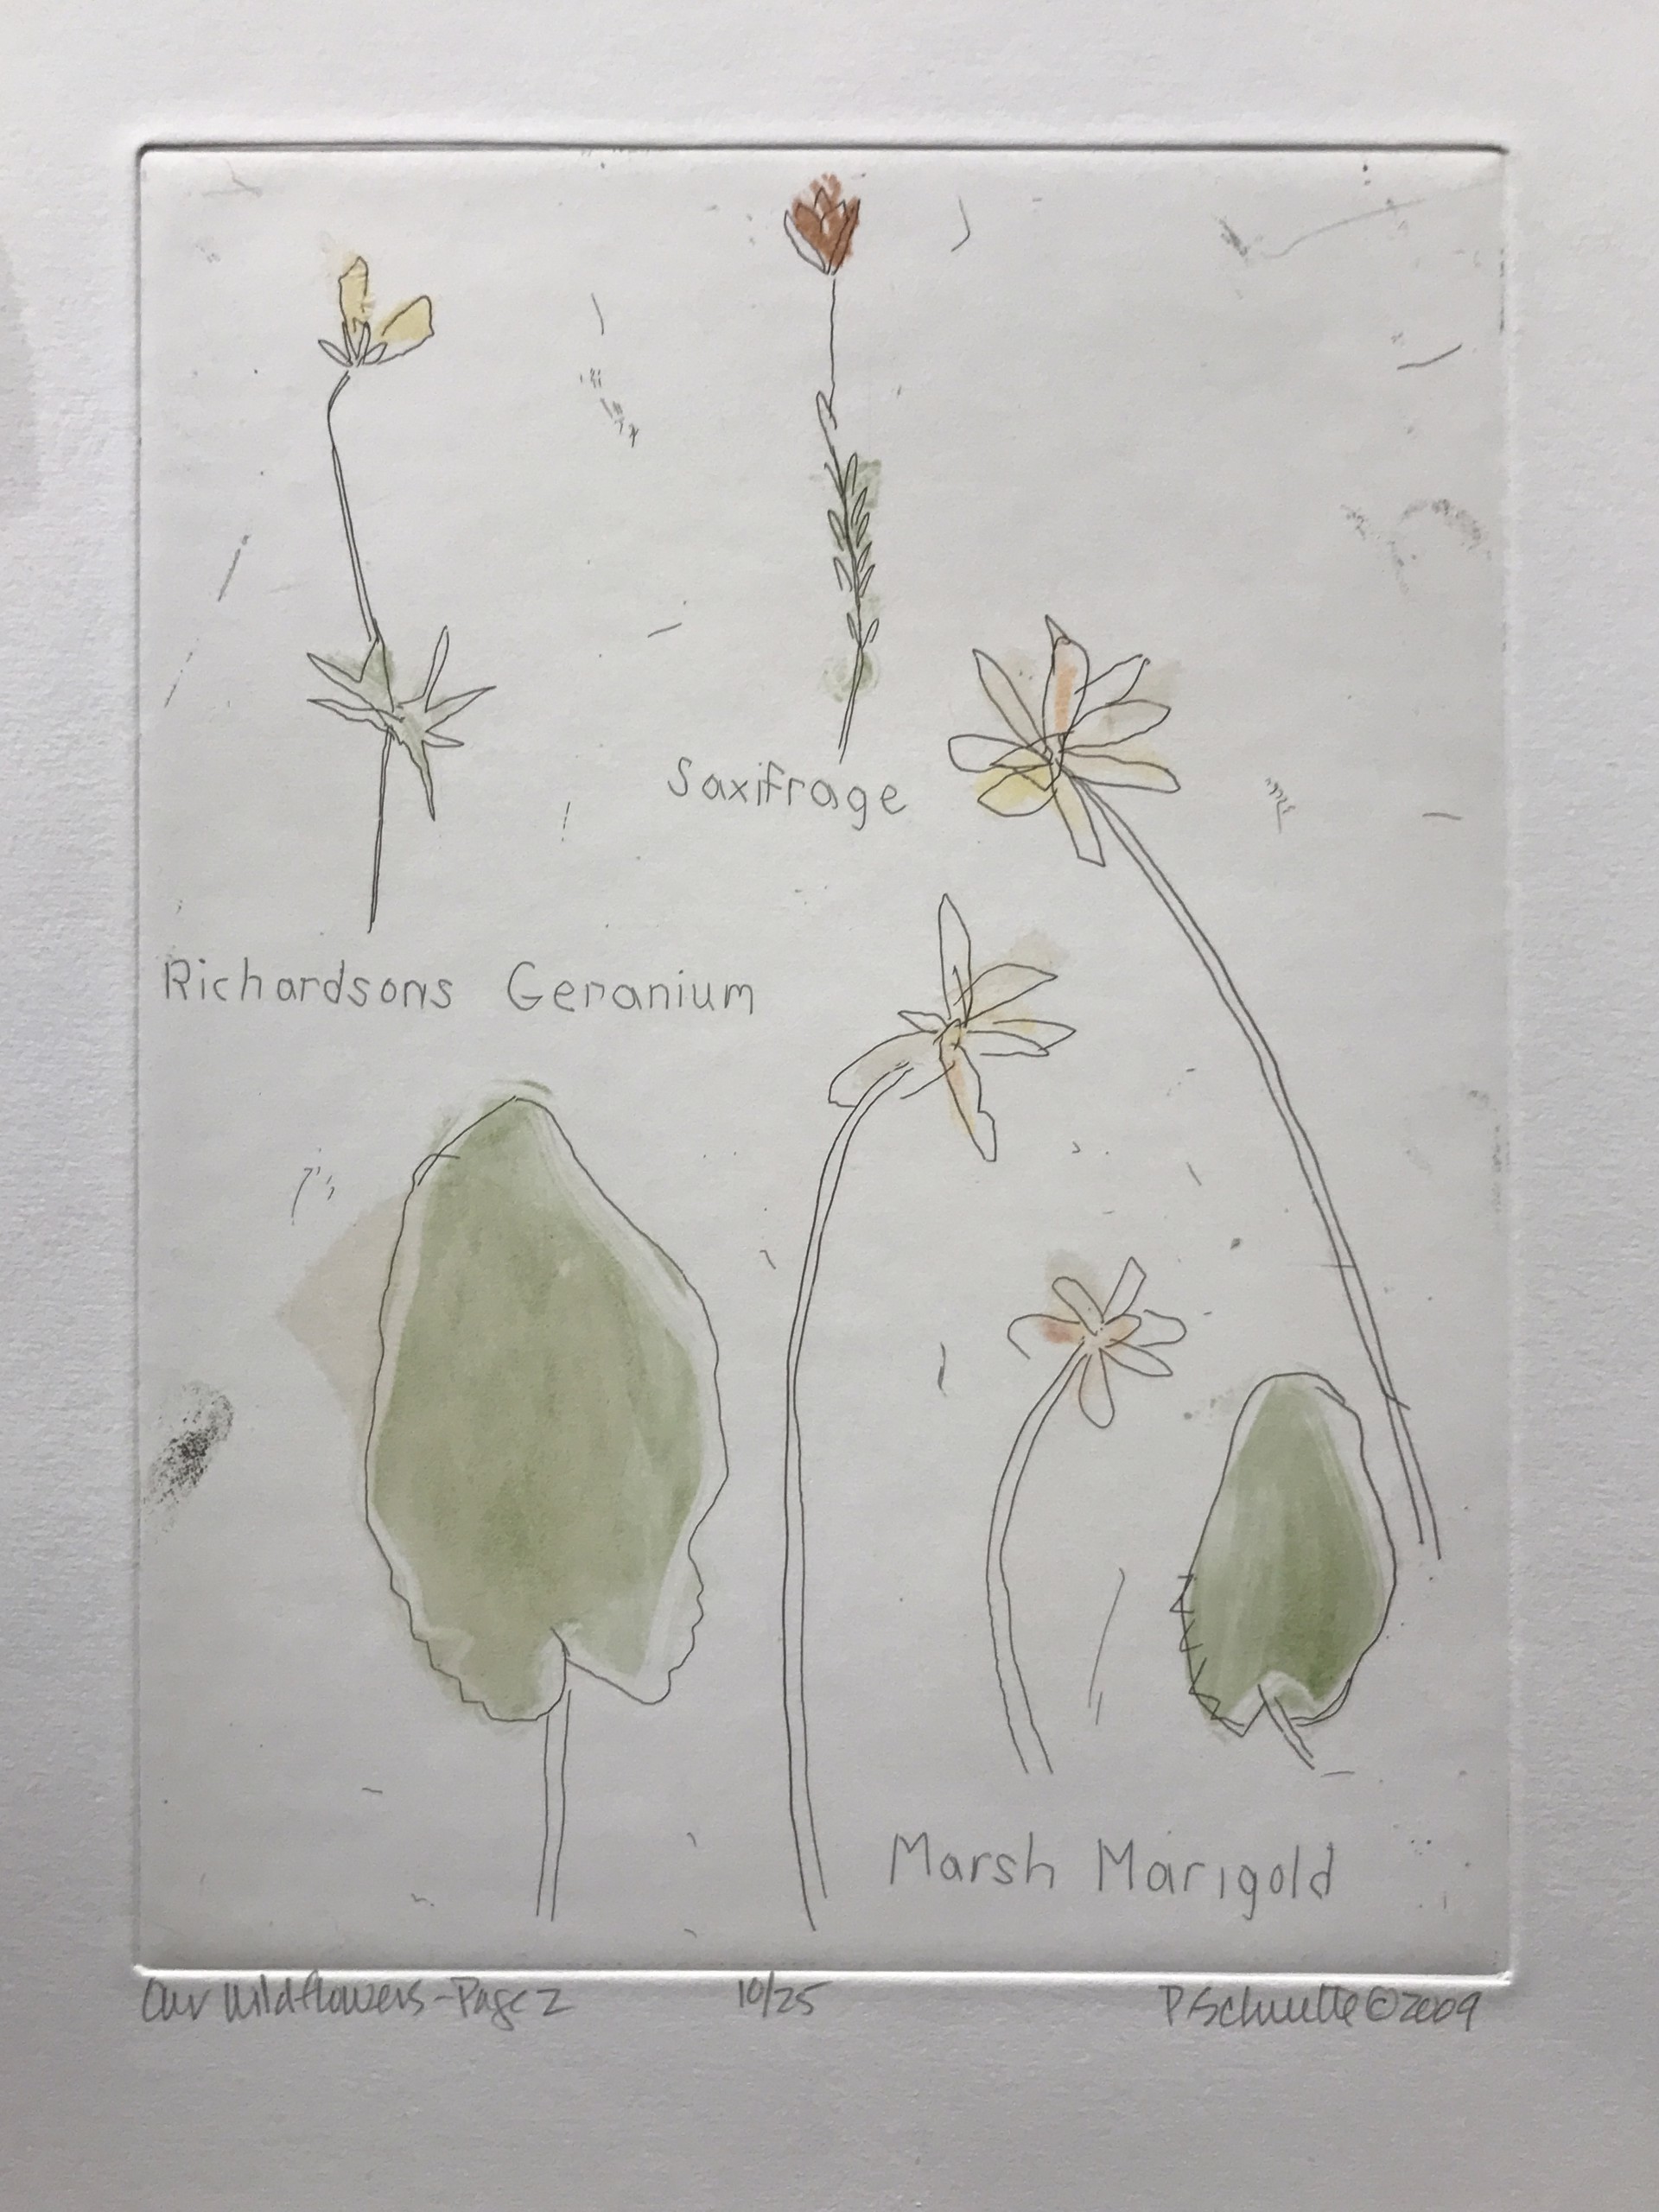 Our Wildflowers - Page 2 by Paula Schuette Kraemer